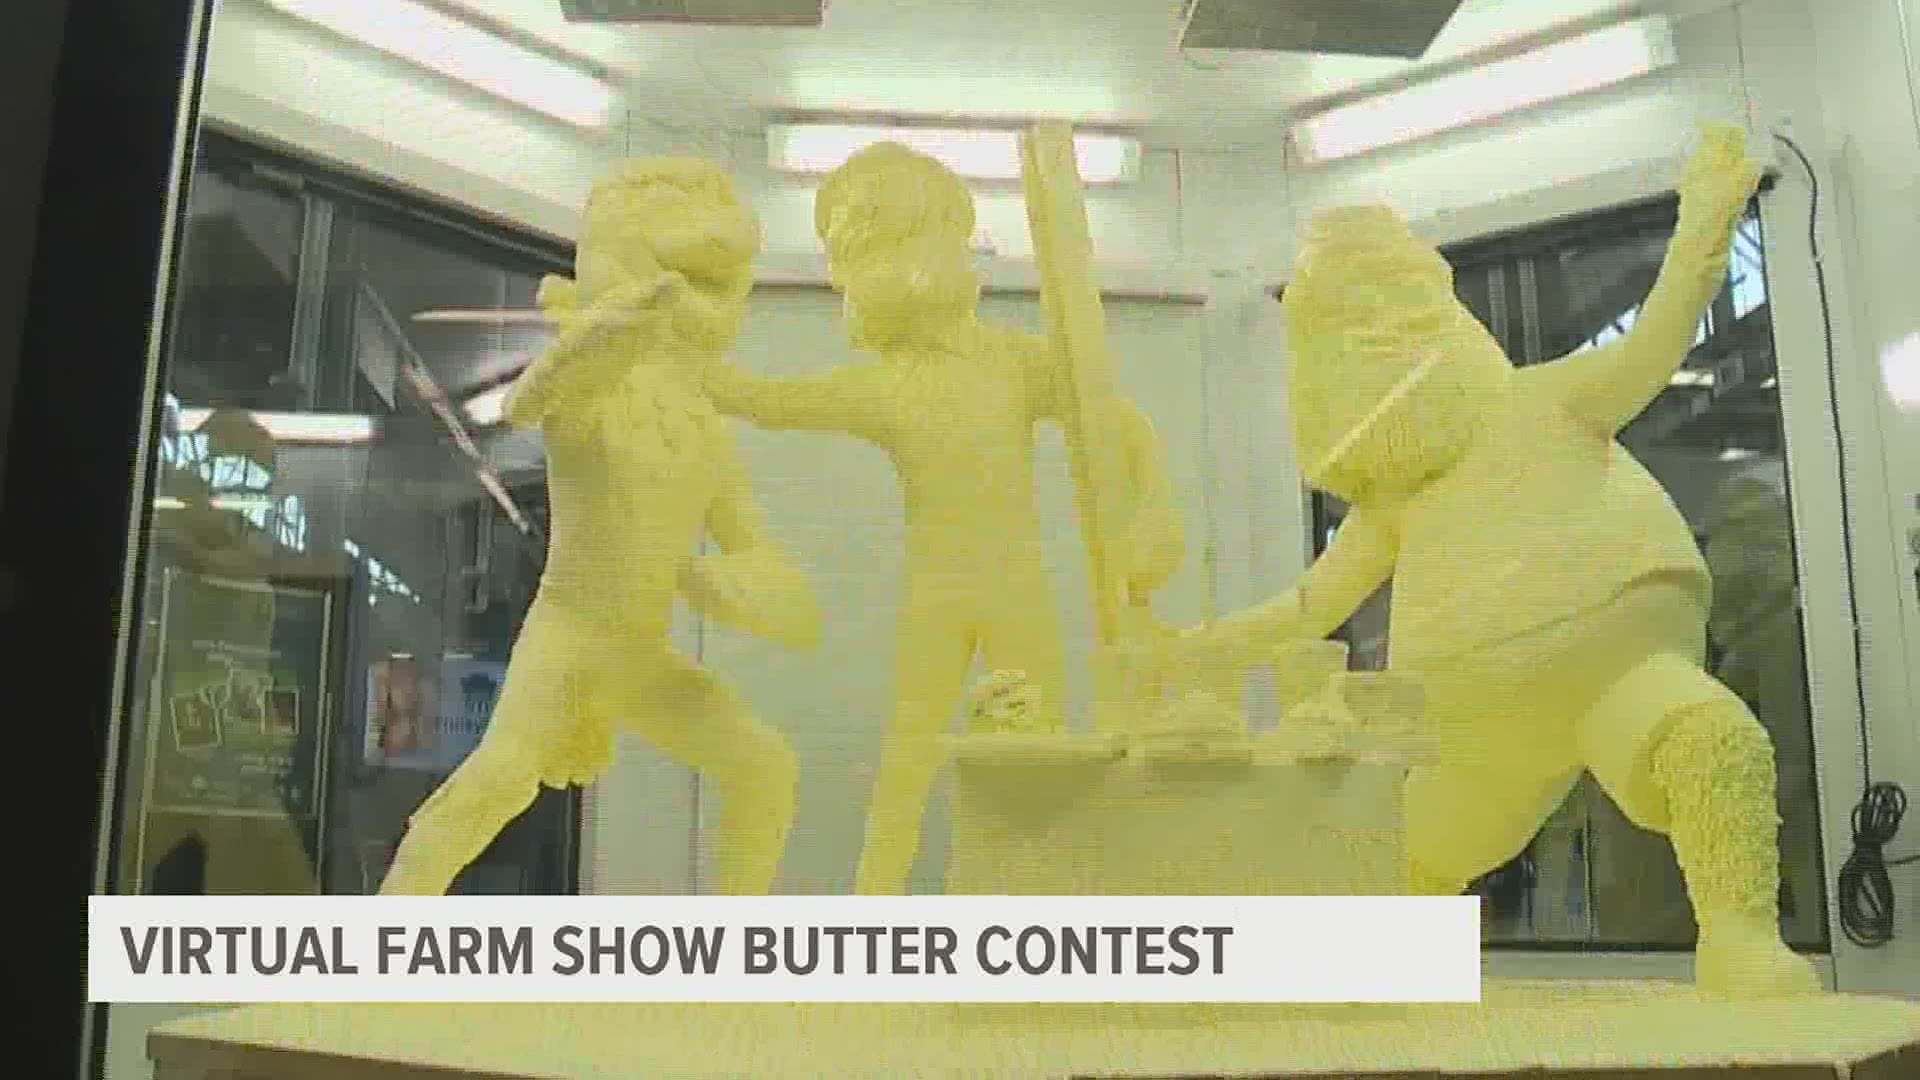 The 2021 Pennsylvania Farm Show is all virtual due to COVID-19, but the new contest "Butter Up" will bring you some fun right at home.